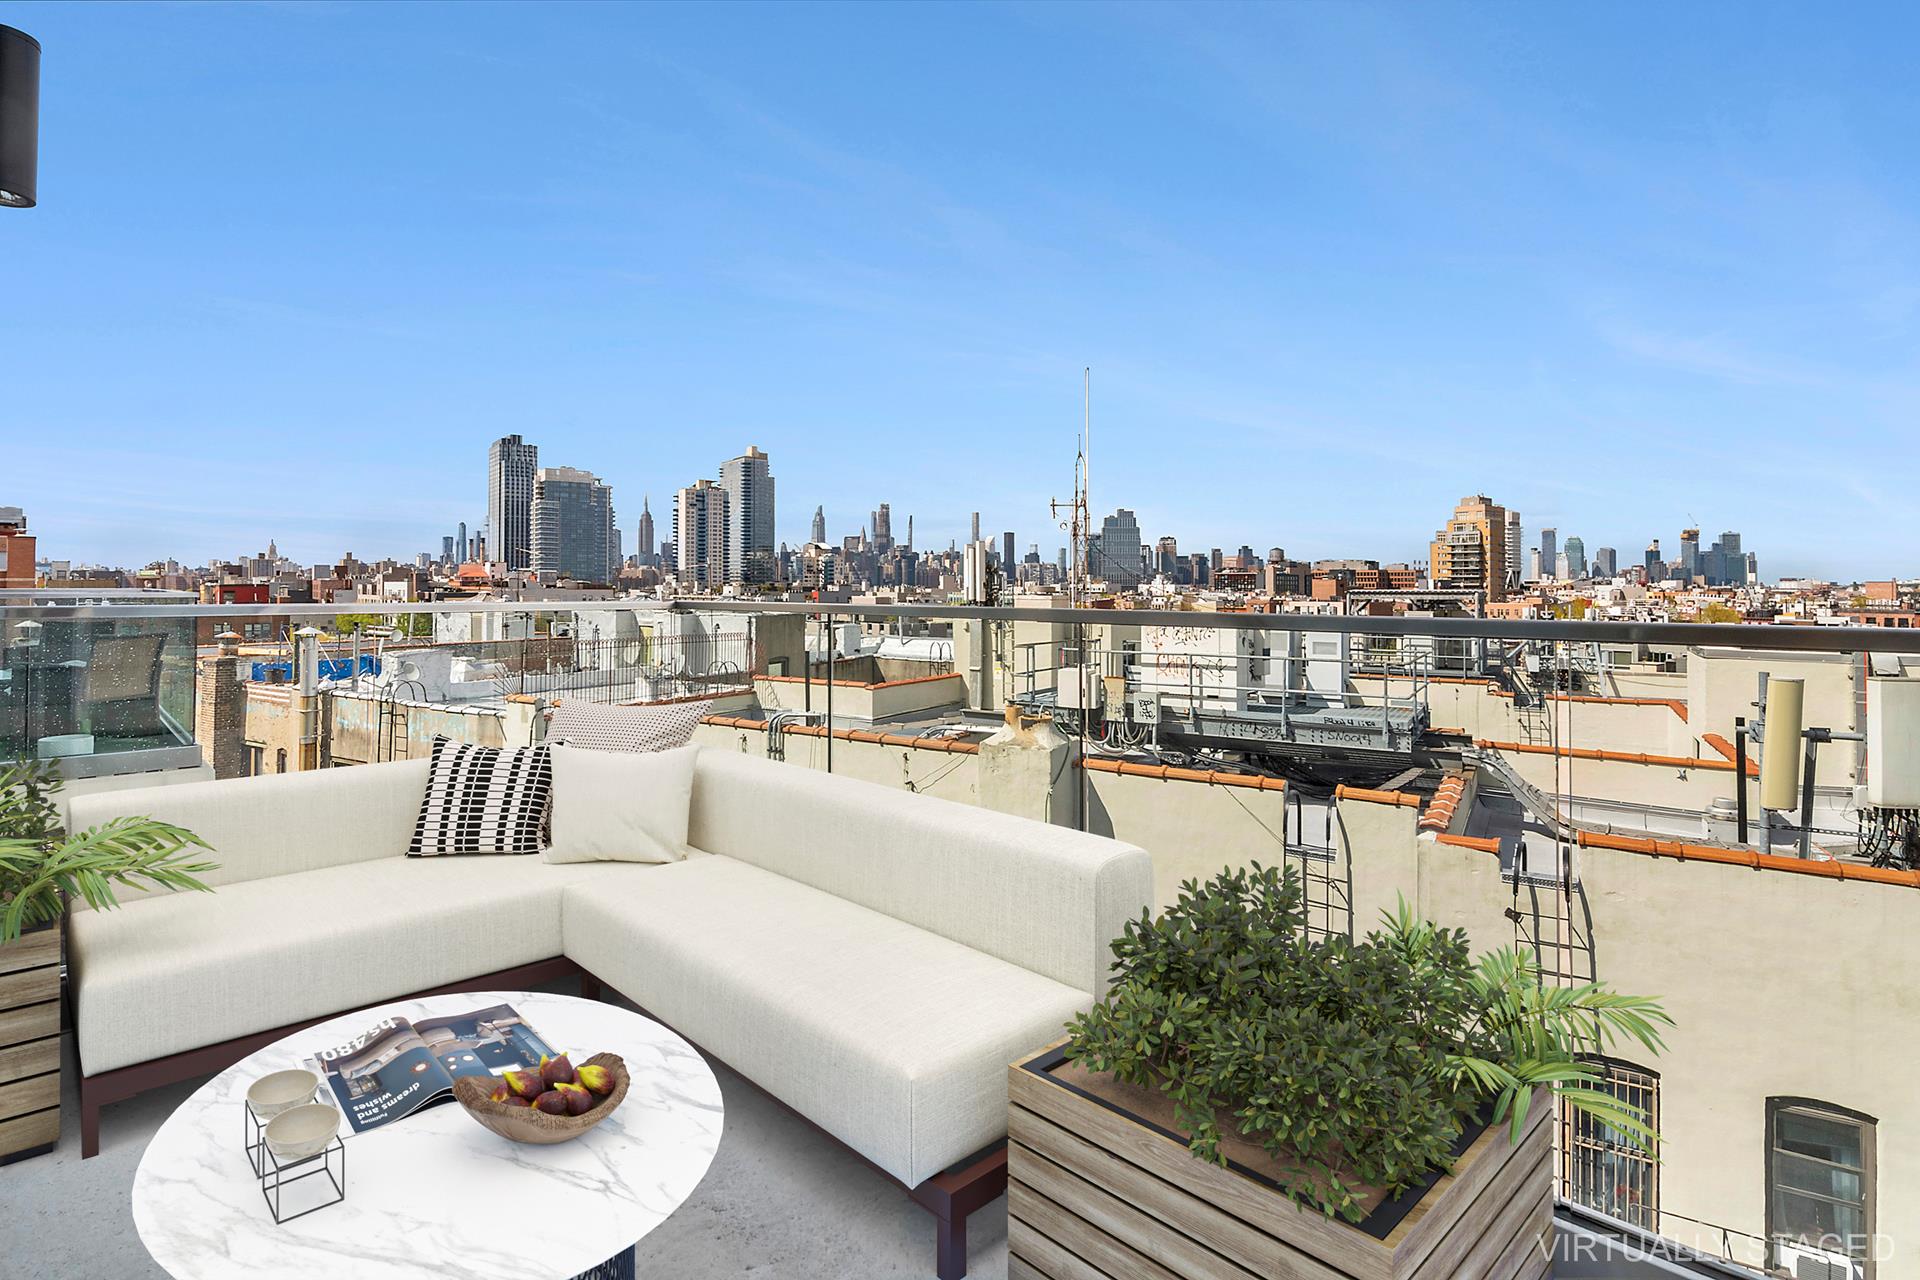 a view of a roof deck with couches and city view